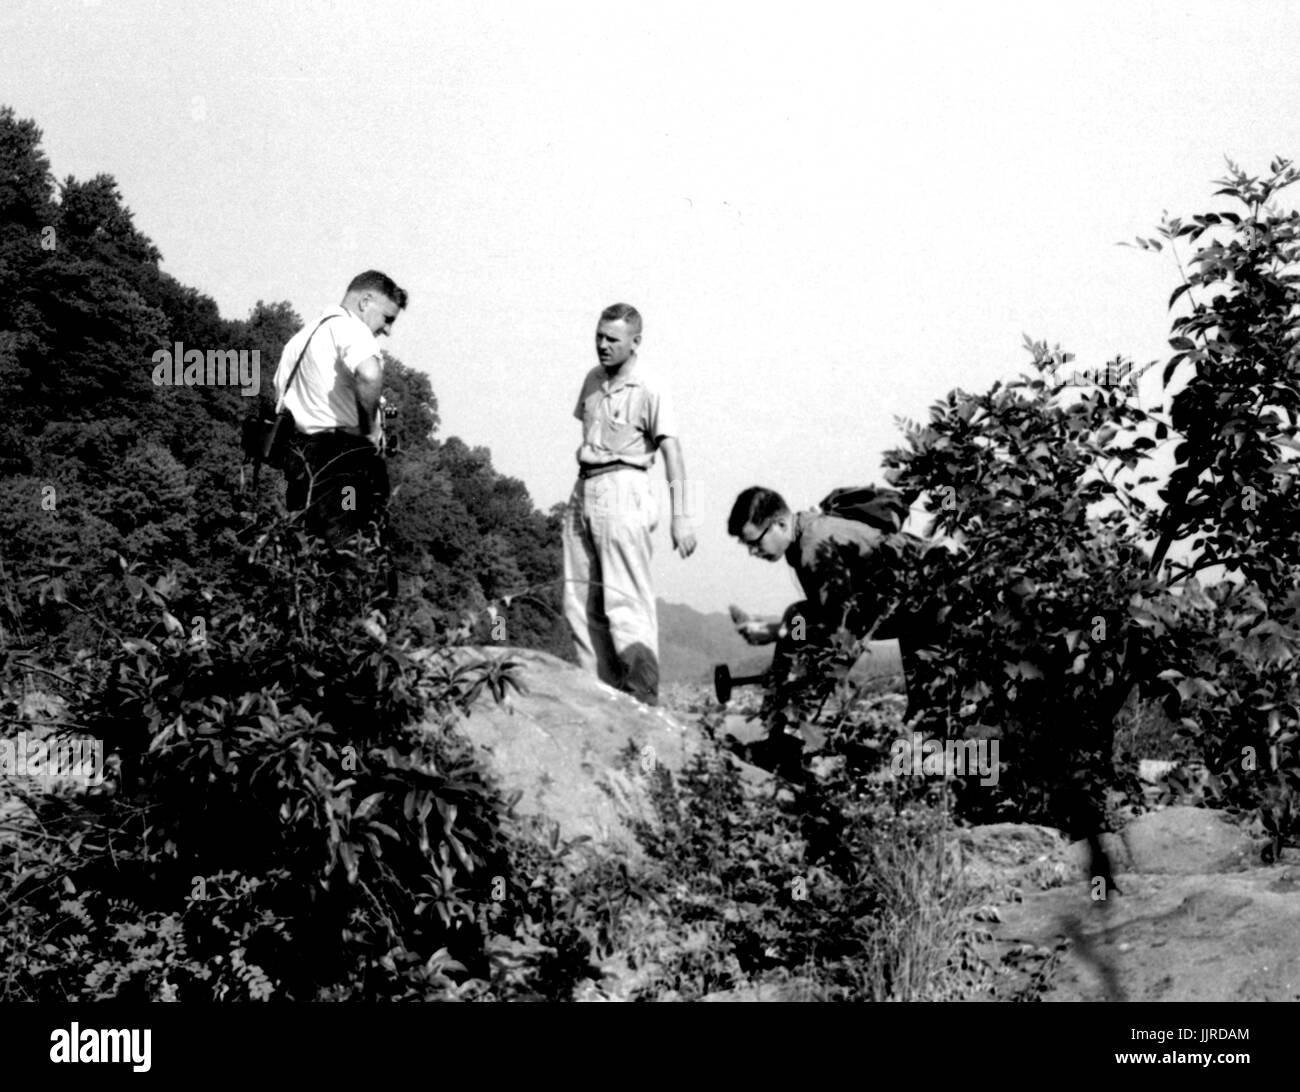 George Wescott Fisher, Clifford A. Hopson, and J. S. Reed, Students from a Johns Hopkins University geology class, collect samples in the field, 1950. Stock Photo